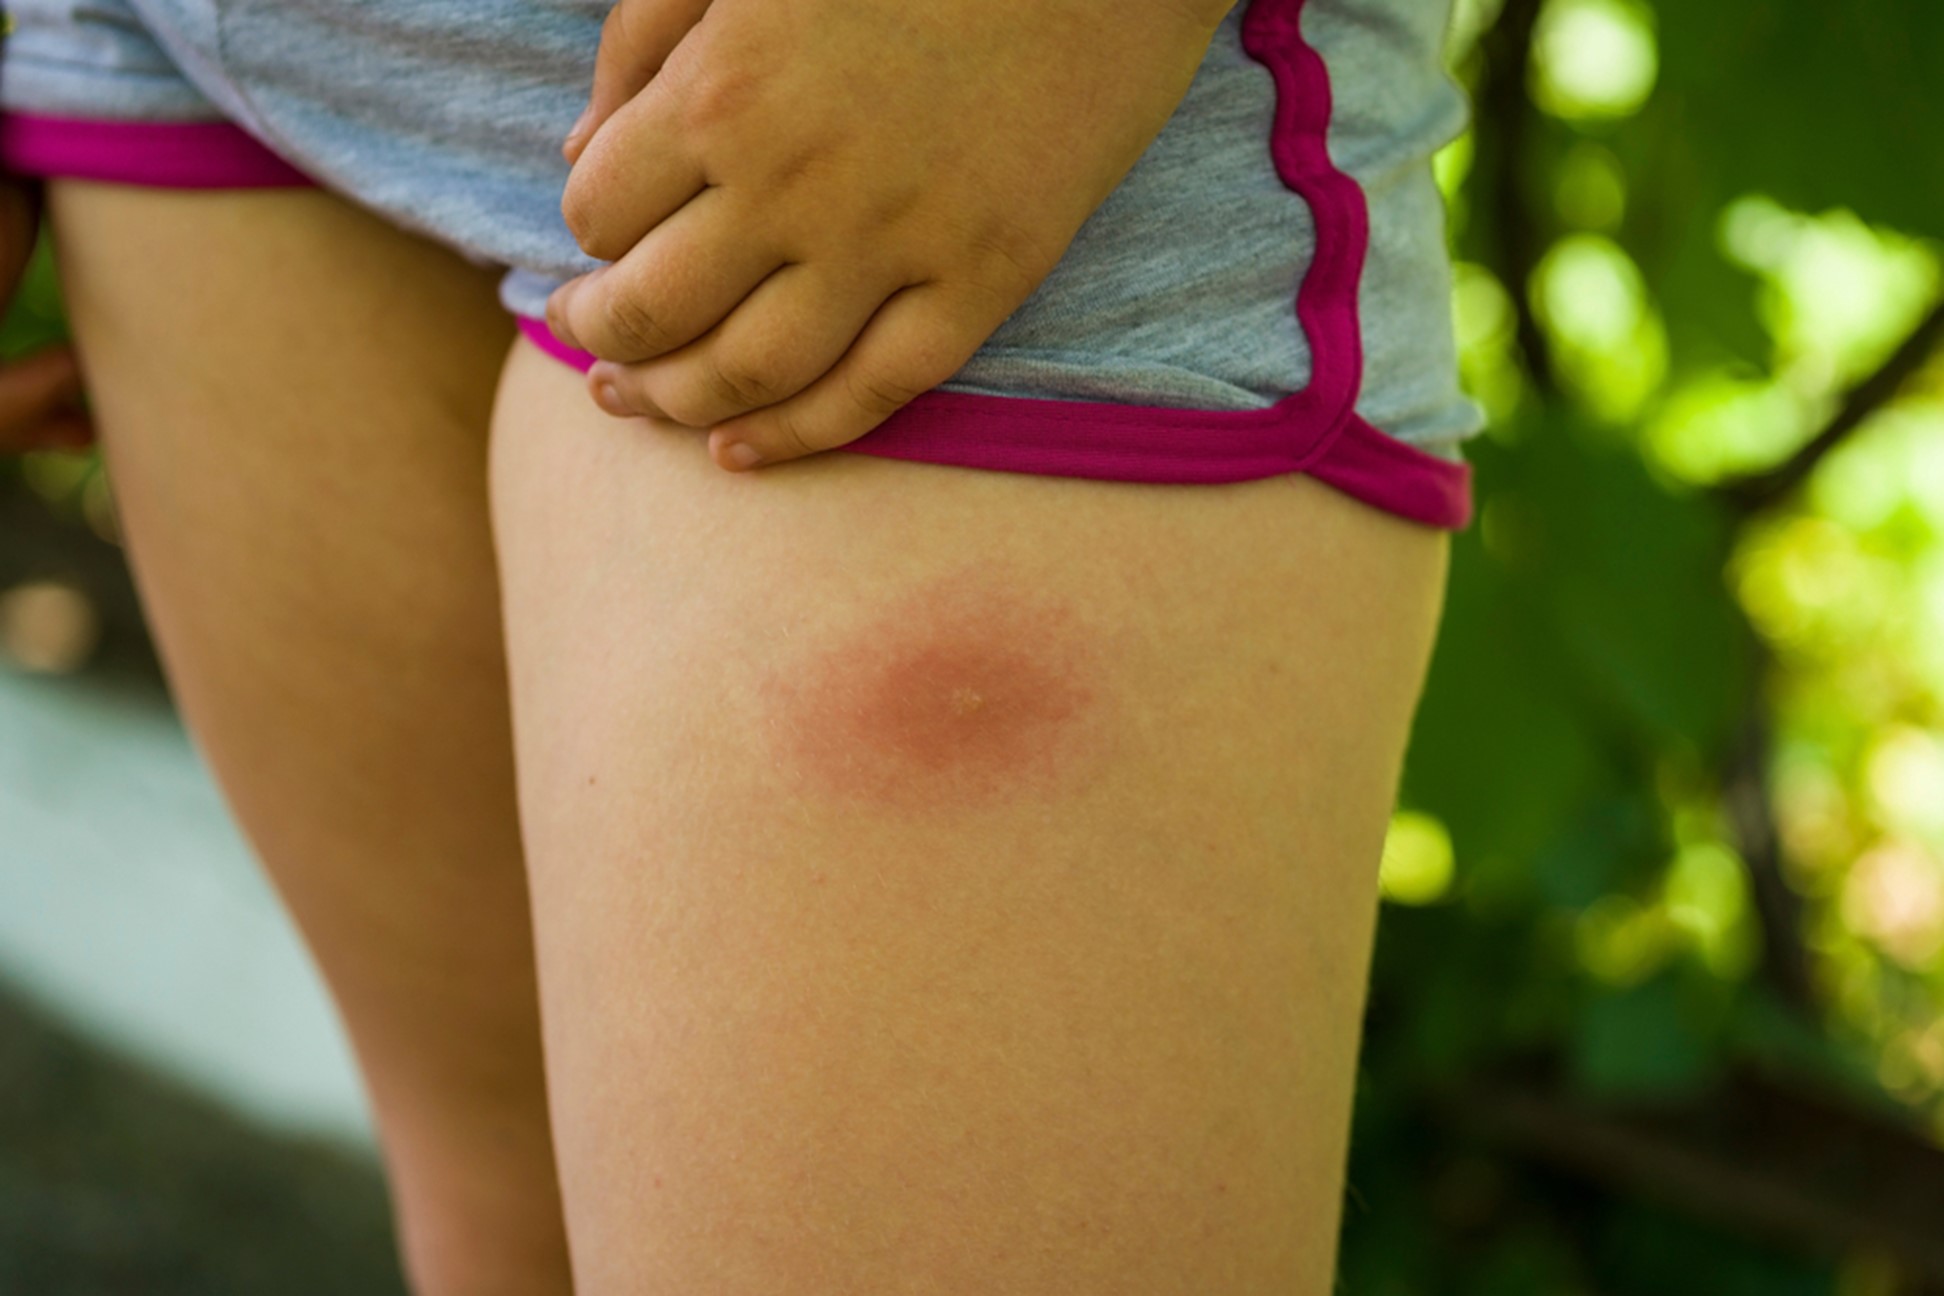 A closeup image of a tick bite on the leg of a young girl.